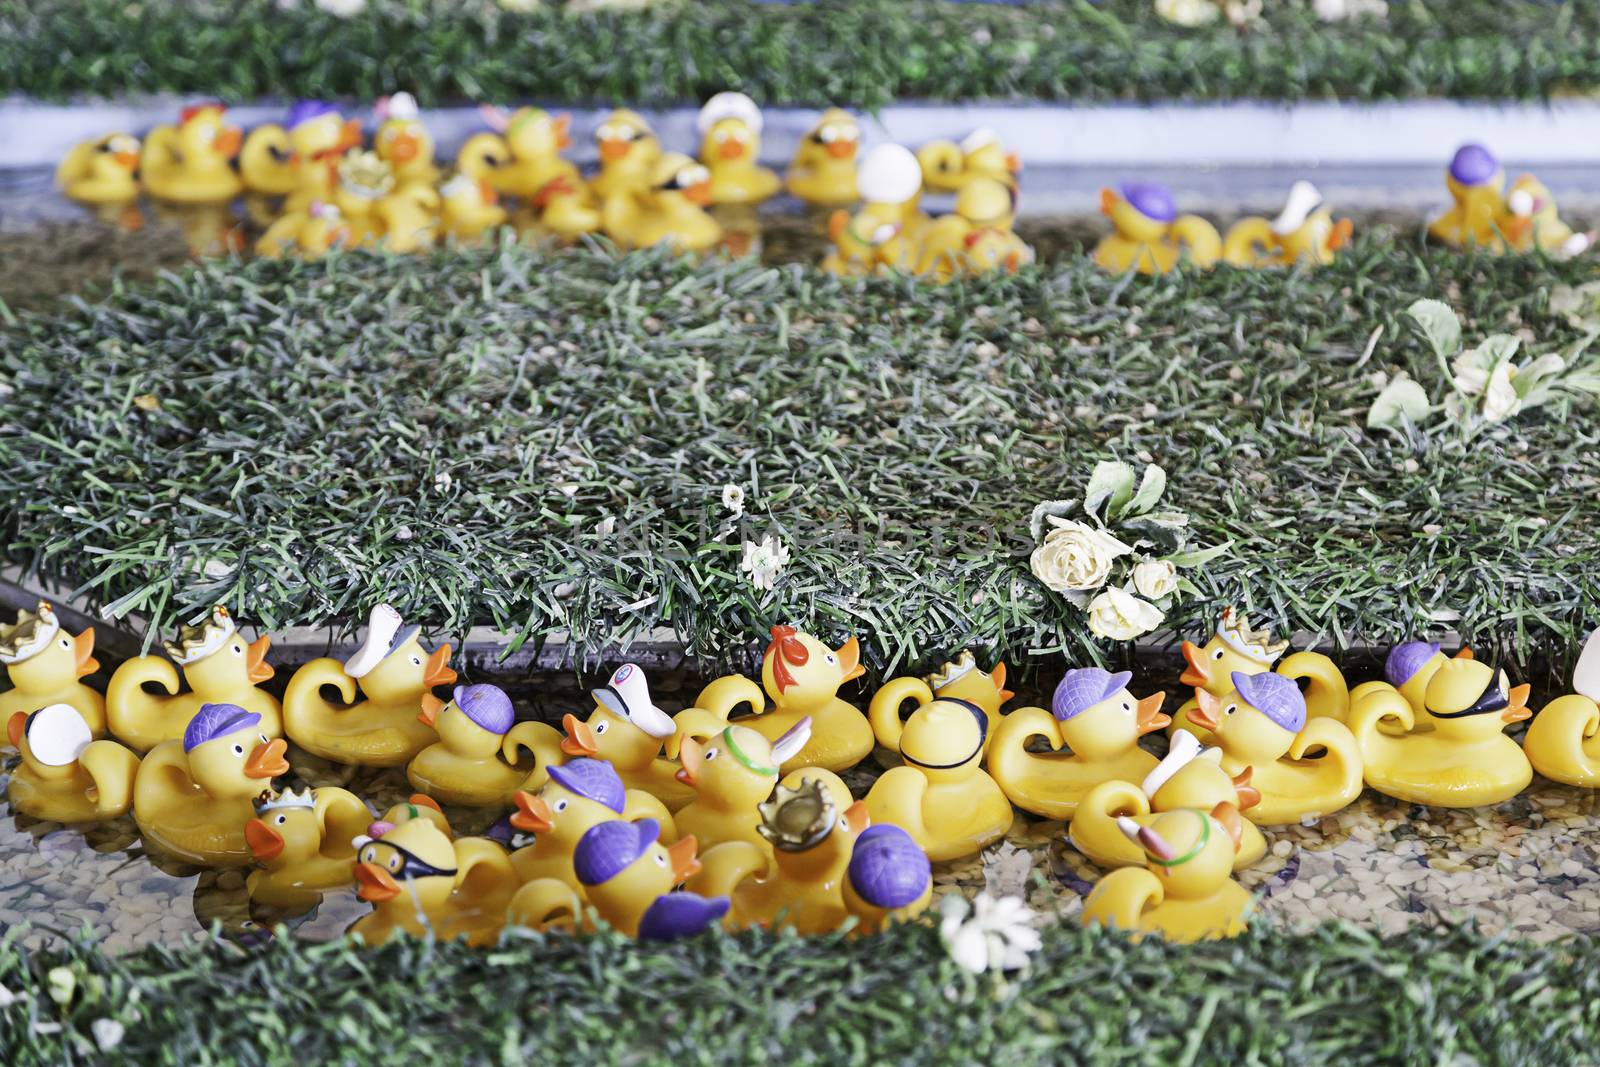 Set of rubber ducks, detail of rubber ducks on a game show, fun